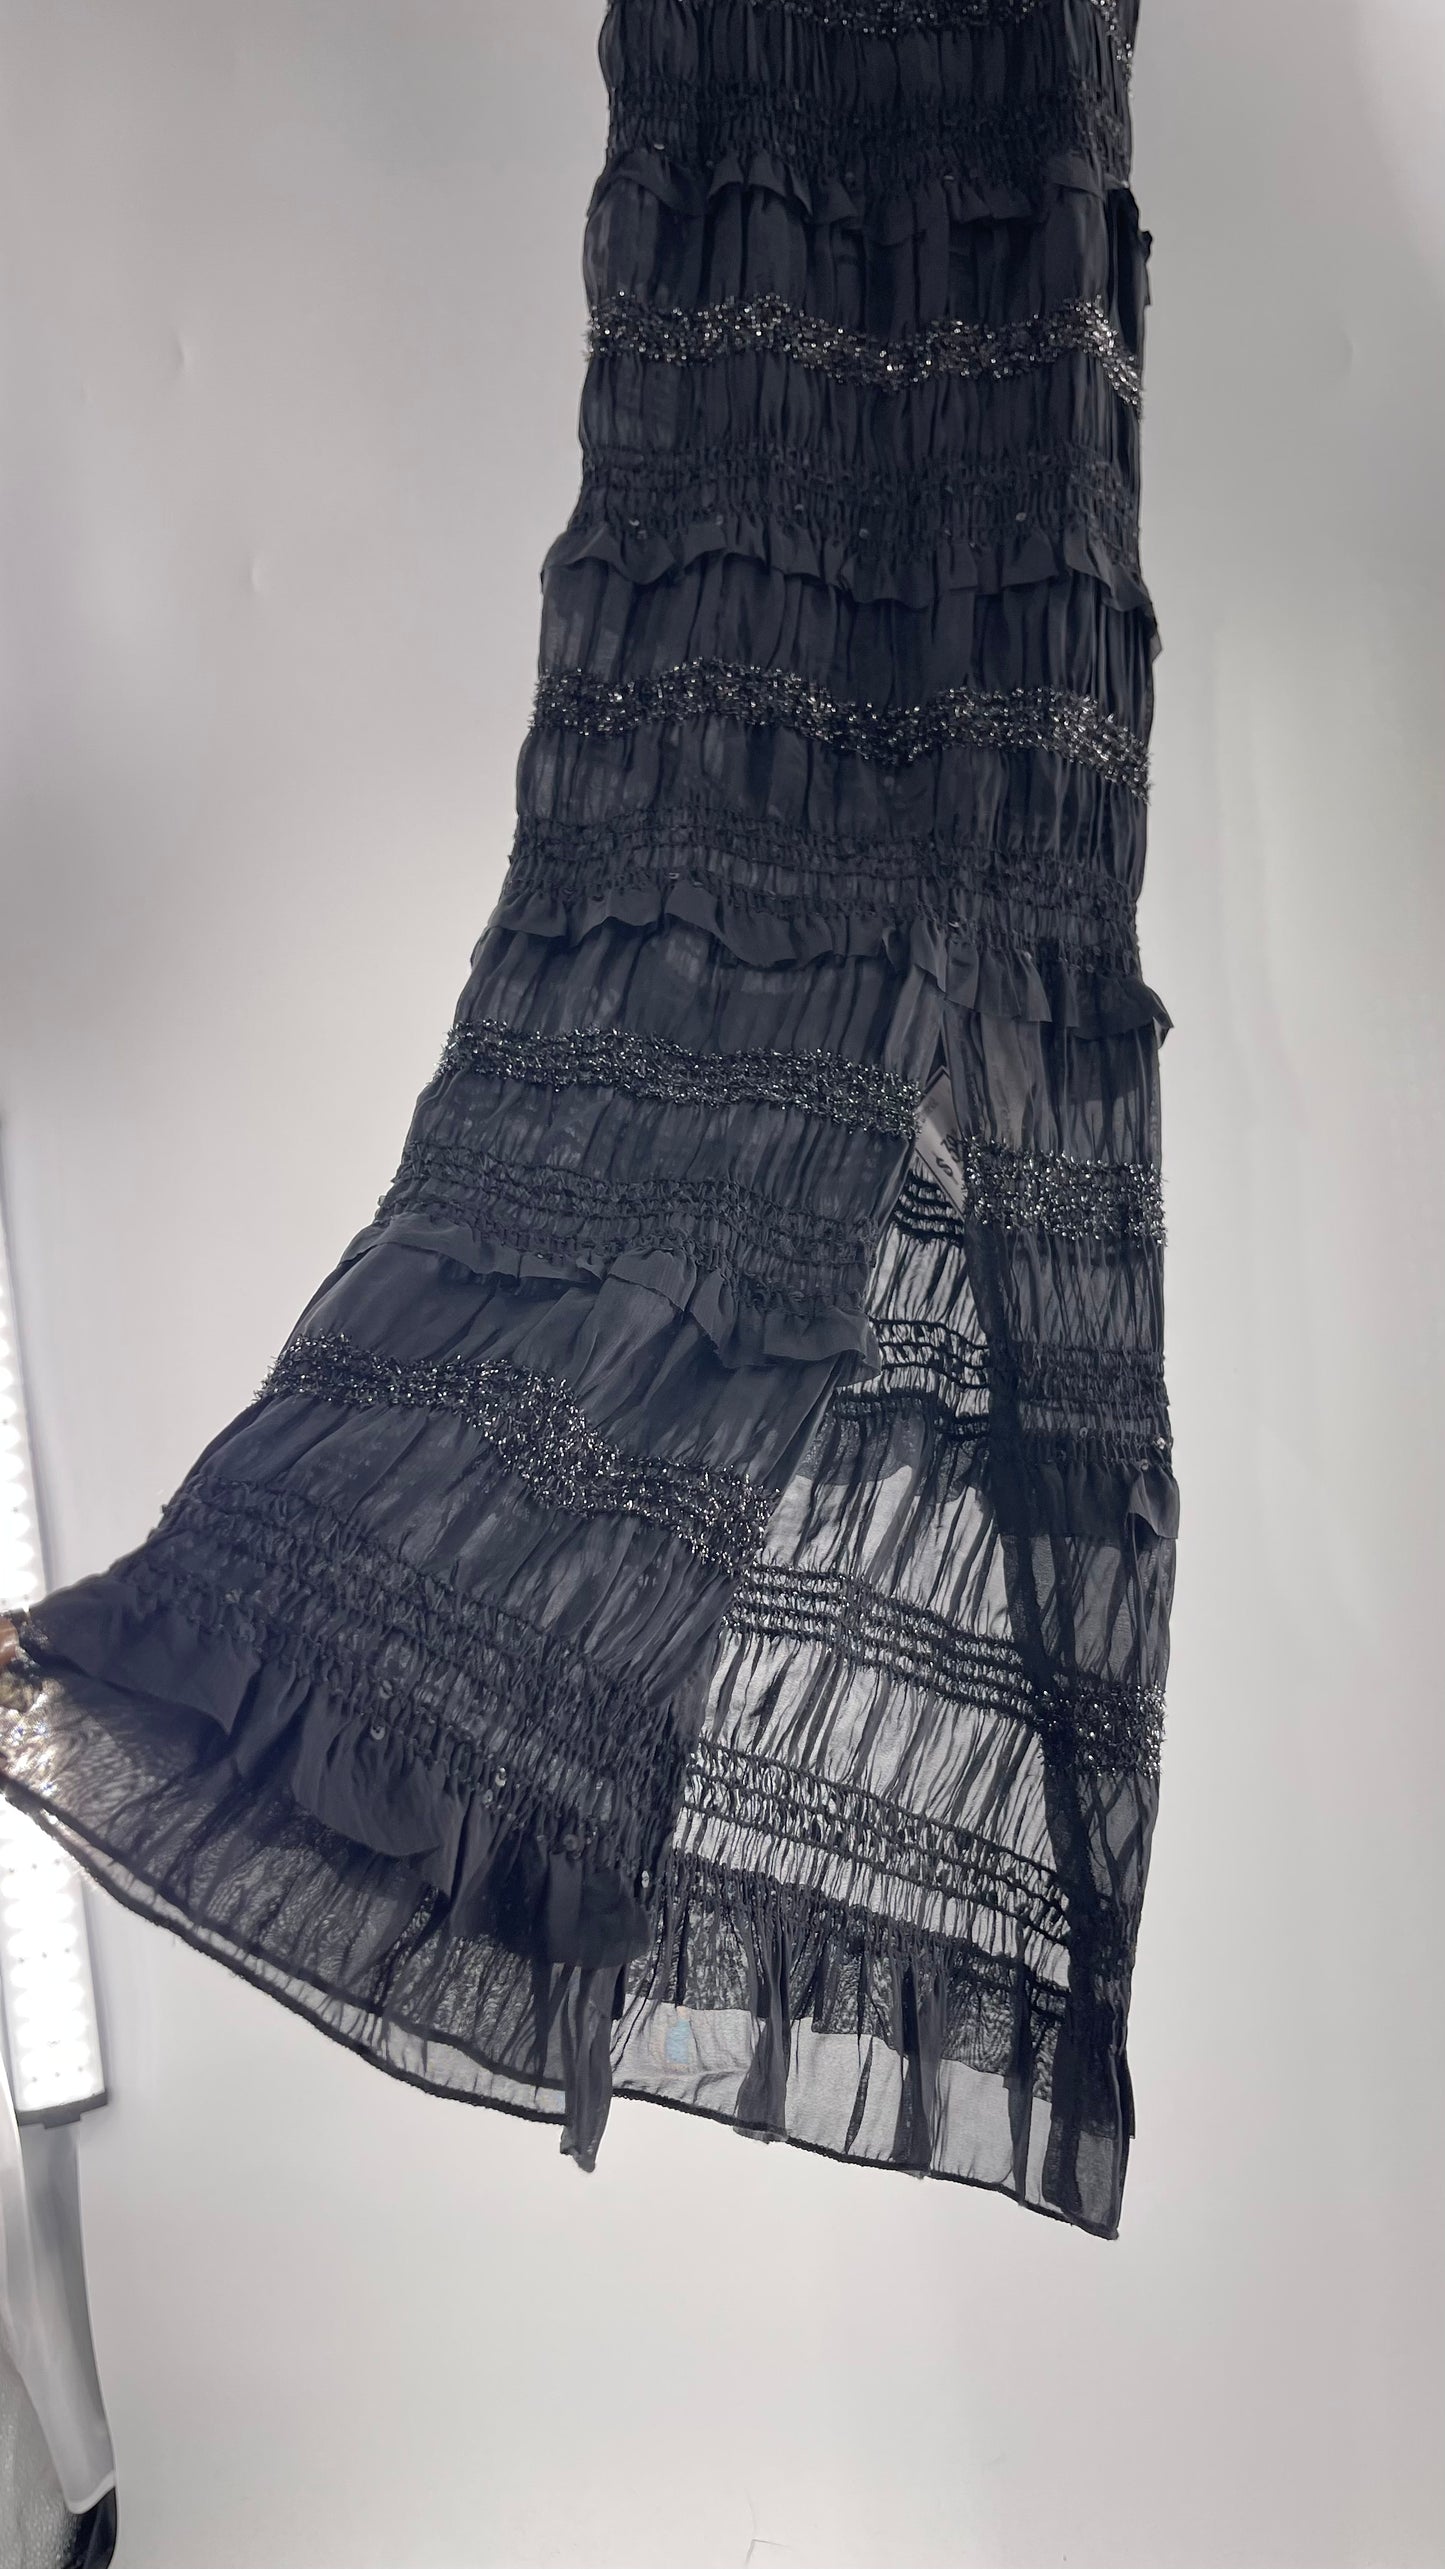 The Commense Black Sheer Crimped Midi Dress with Stripes of Tinsel and Ruffle with Tags Attached (Medium)